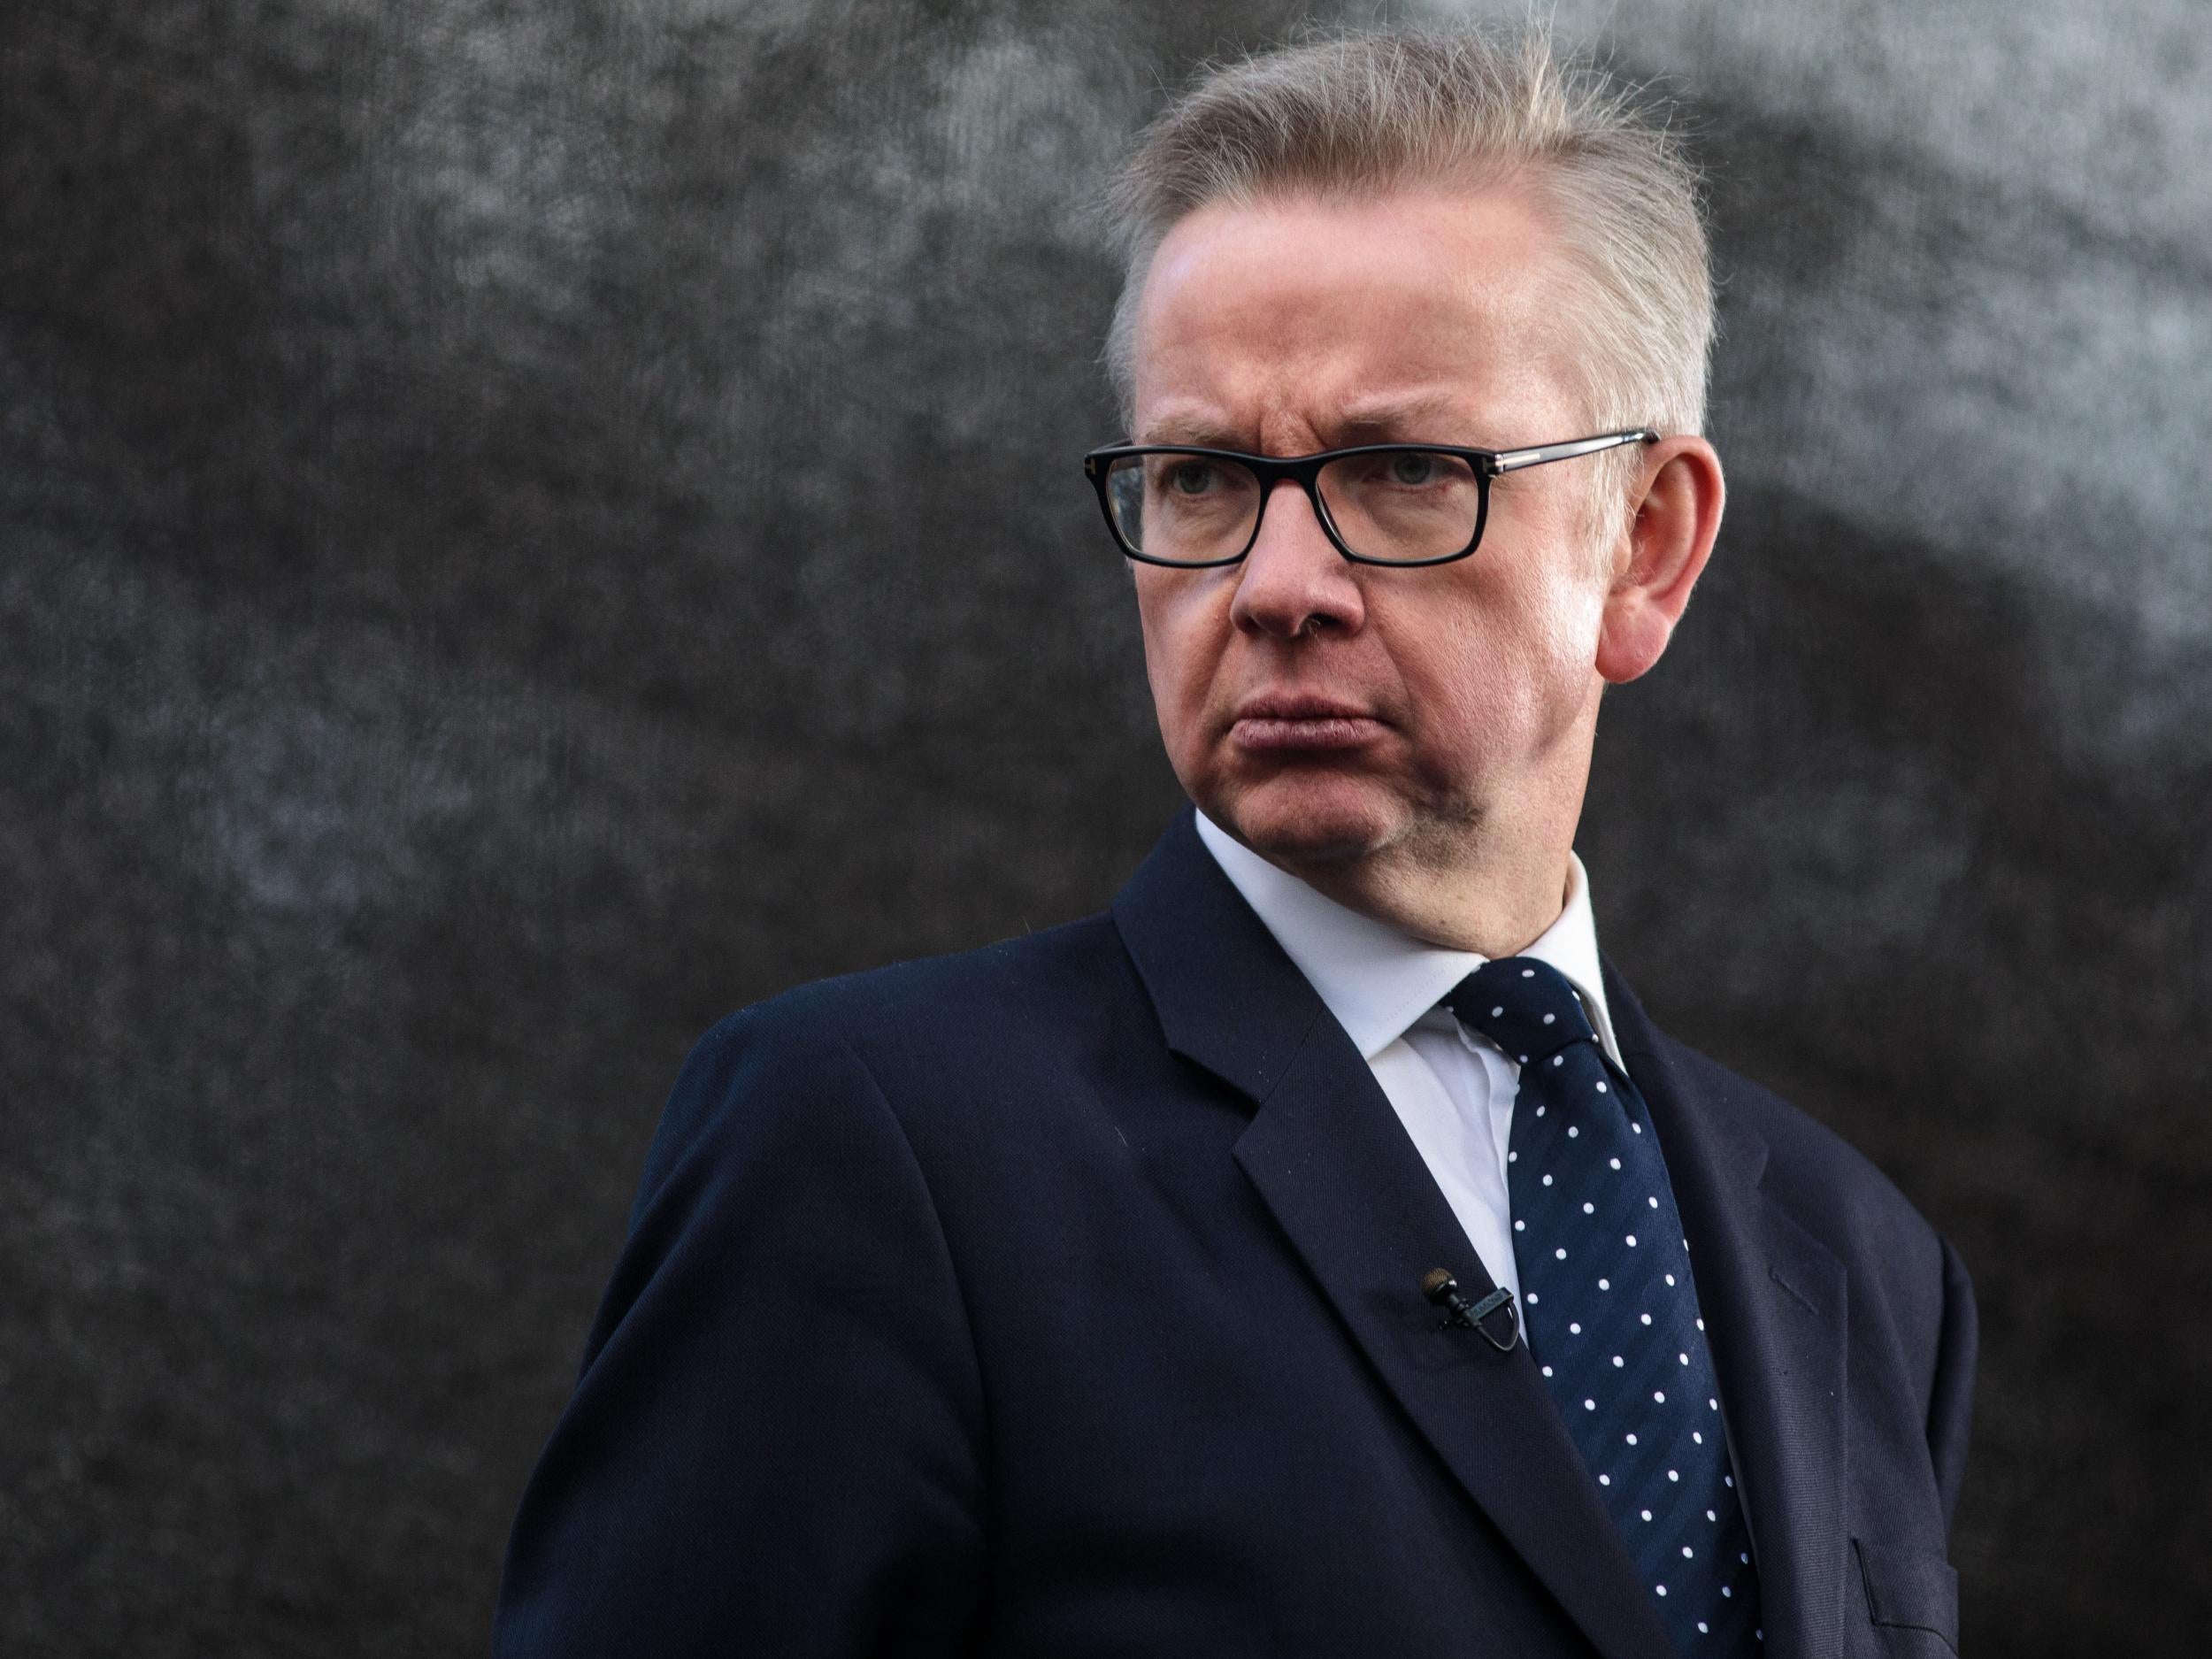 Michael Gove won’t be attending many dinner parties in the event of a no-deal Brexit